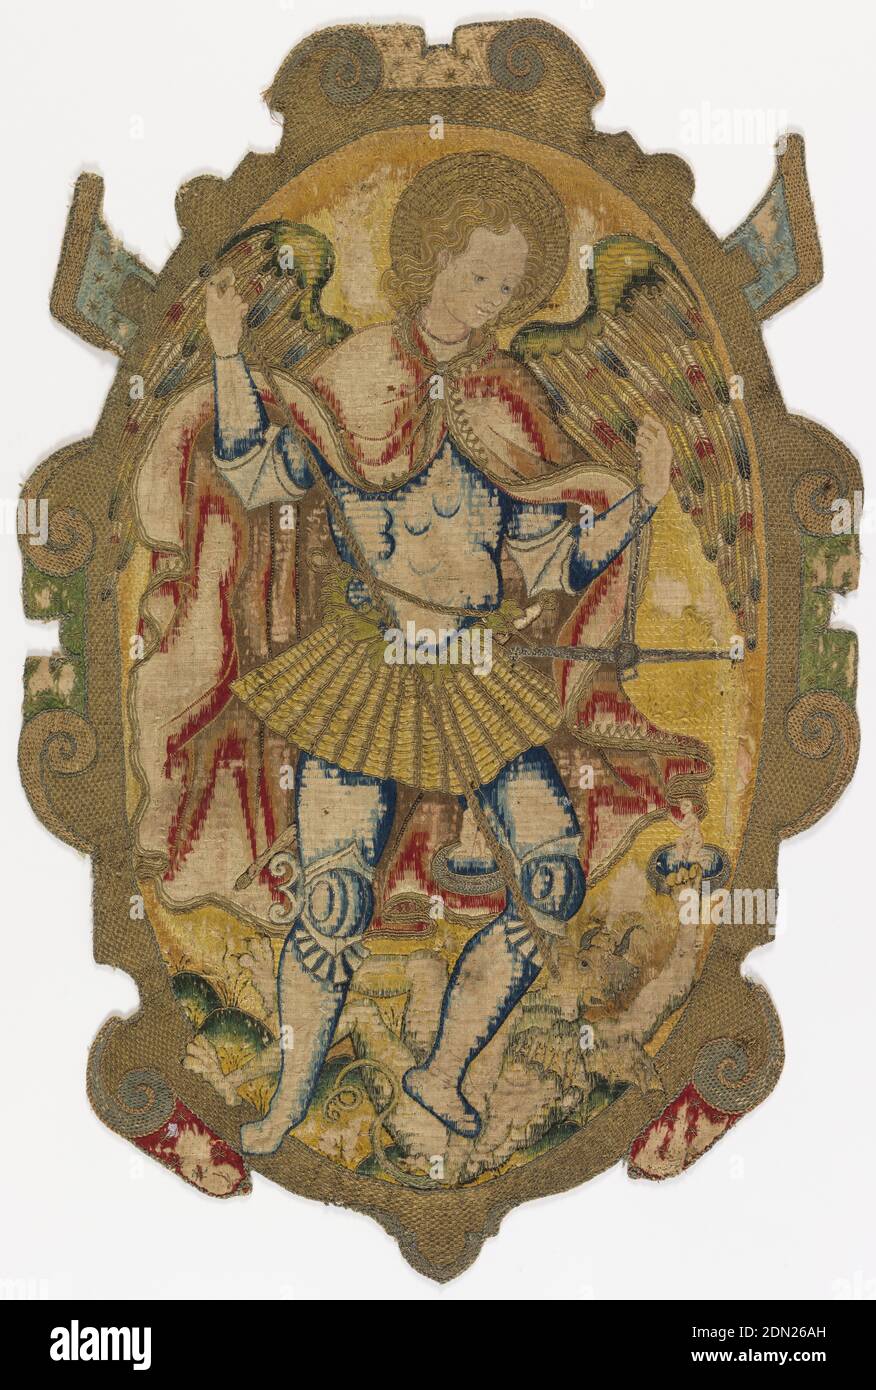 Escutcheon, Medium: silk and metallic embroidery, linen foundation Technique: embroidered on plain weave, Escutcheon with the figure of Saint Michael the Archangel slaying Satan, within an oval framework., Italy or Spain, 16th century, embroidery & stitching, Escutcheon Stock Photo